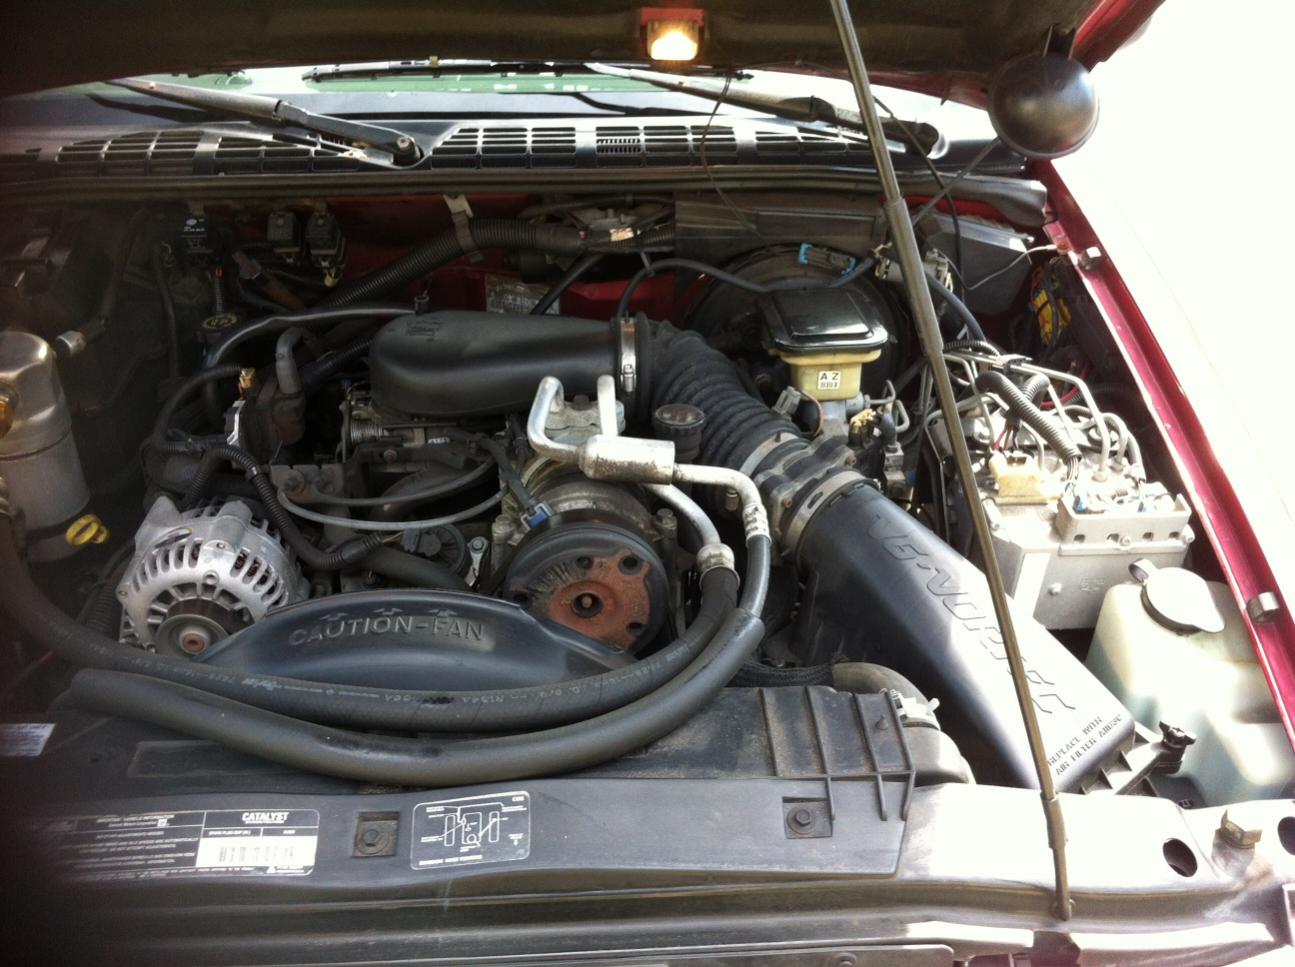 trying to increase gas mileage.... - Page 5 - Blazer Forum - Chevy How To Improve Fuel Economy On 5.3 Chevy